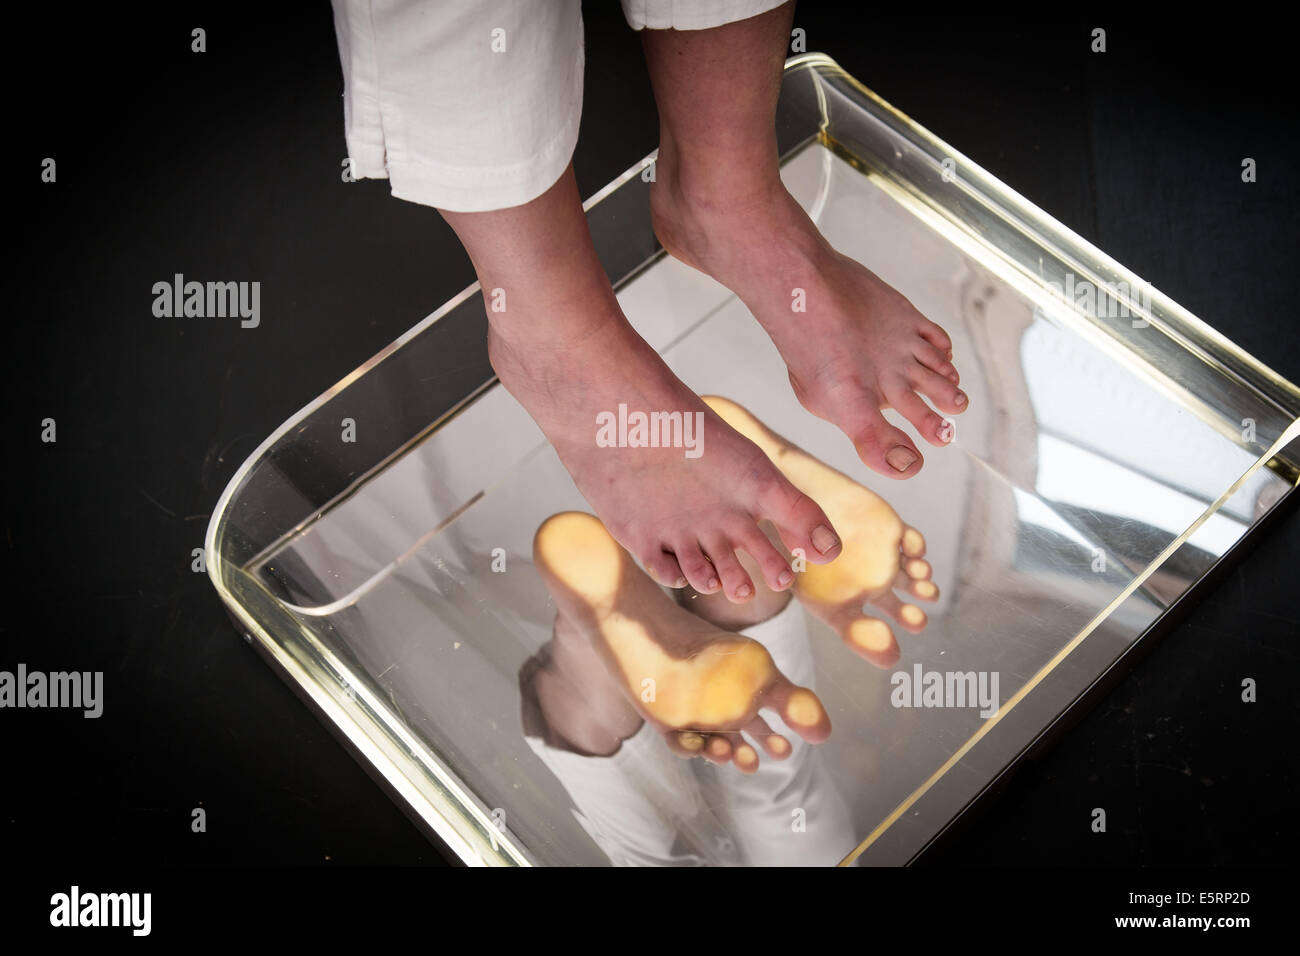 Examination of the sole of a female patient's feet with a podoscope. Stock Photo